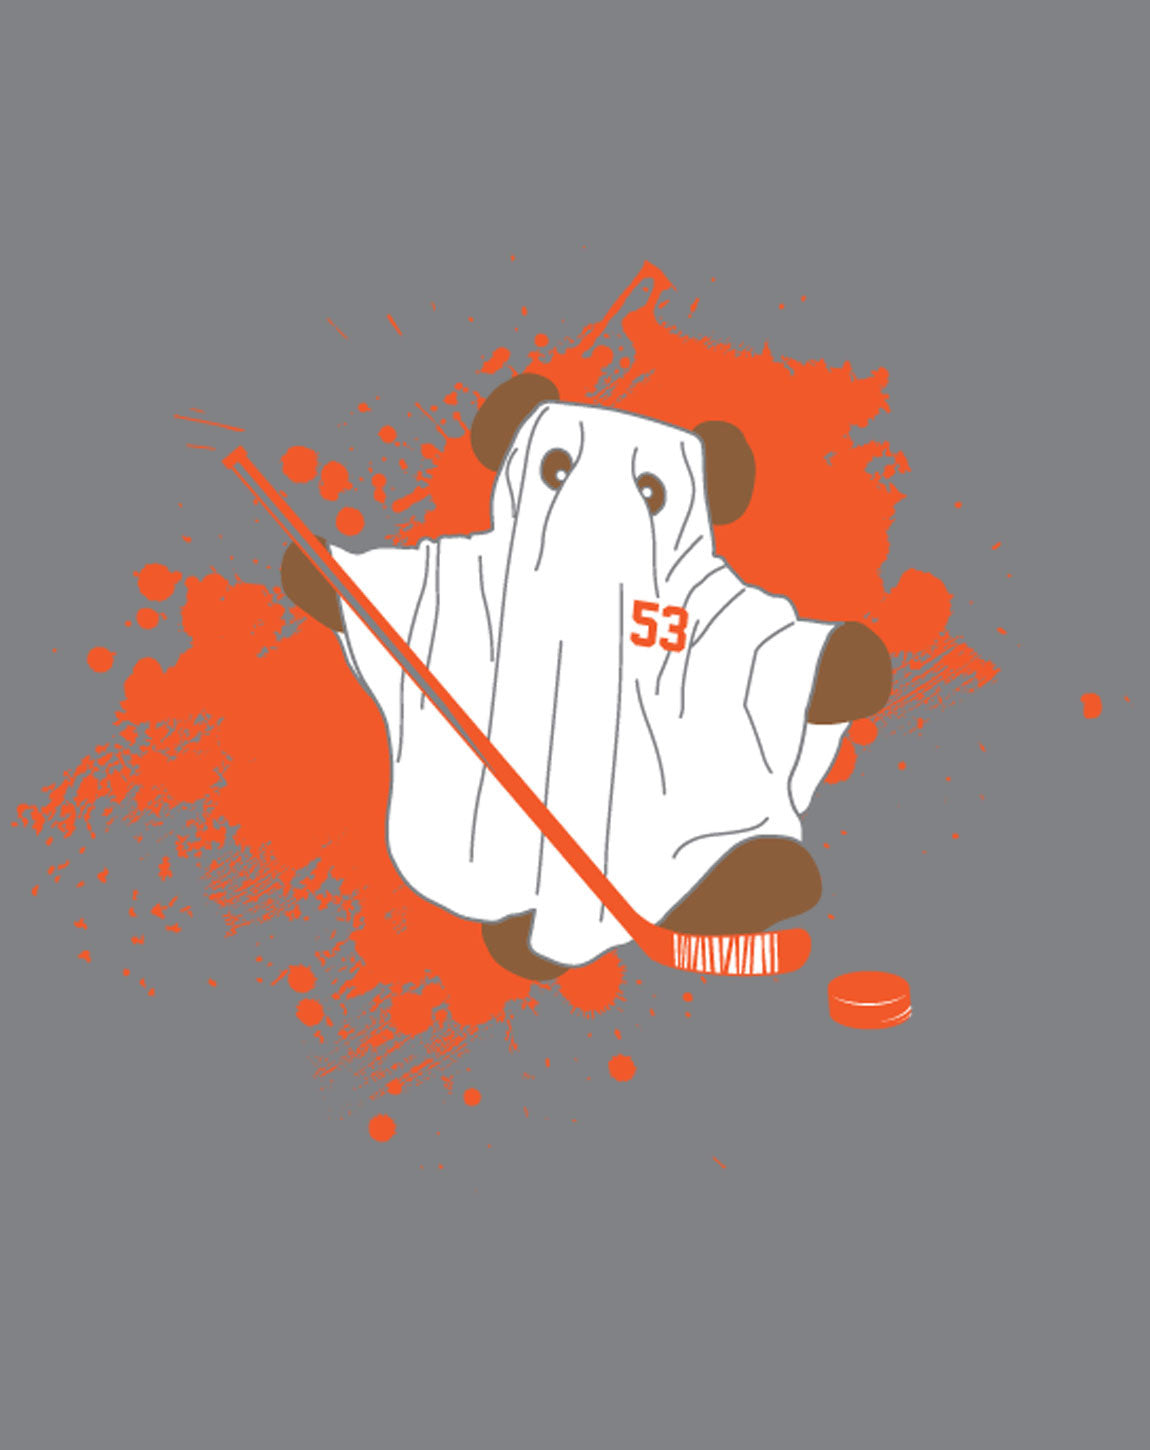 flyers ghost t shirt